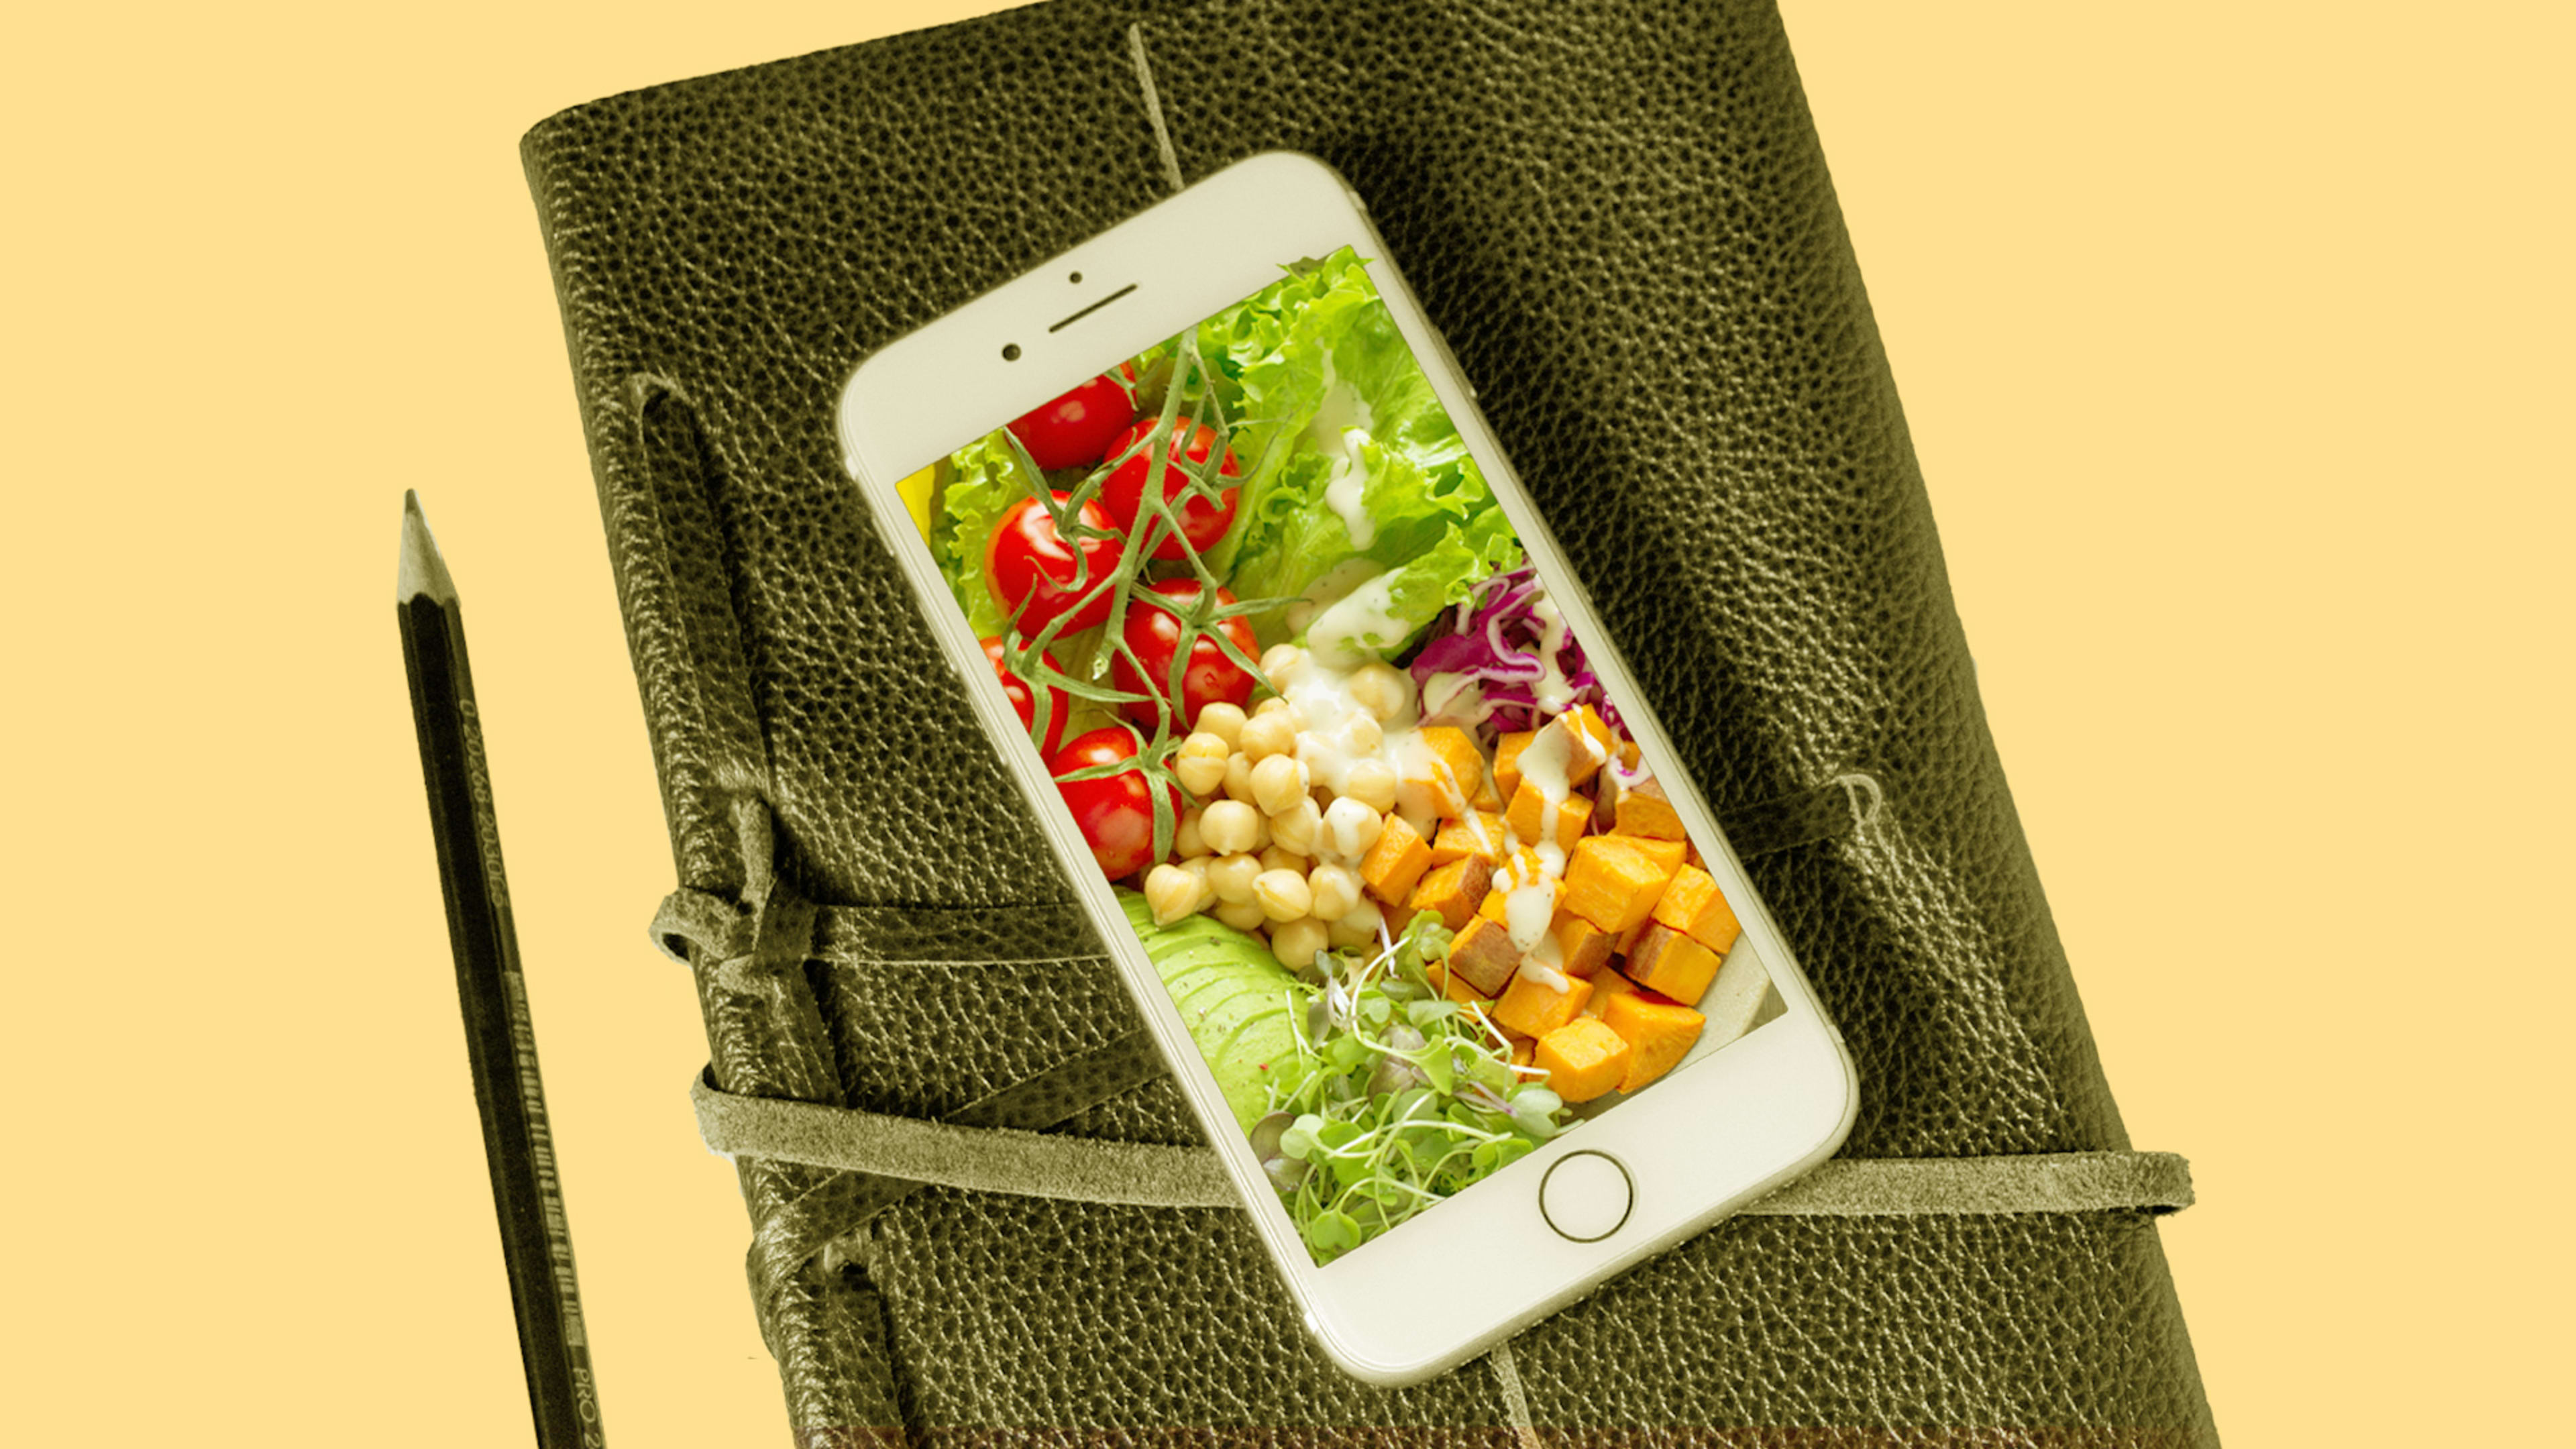 What exactly are dieting apps doing with all your data?